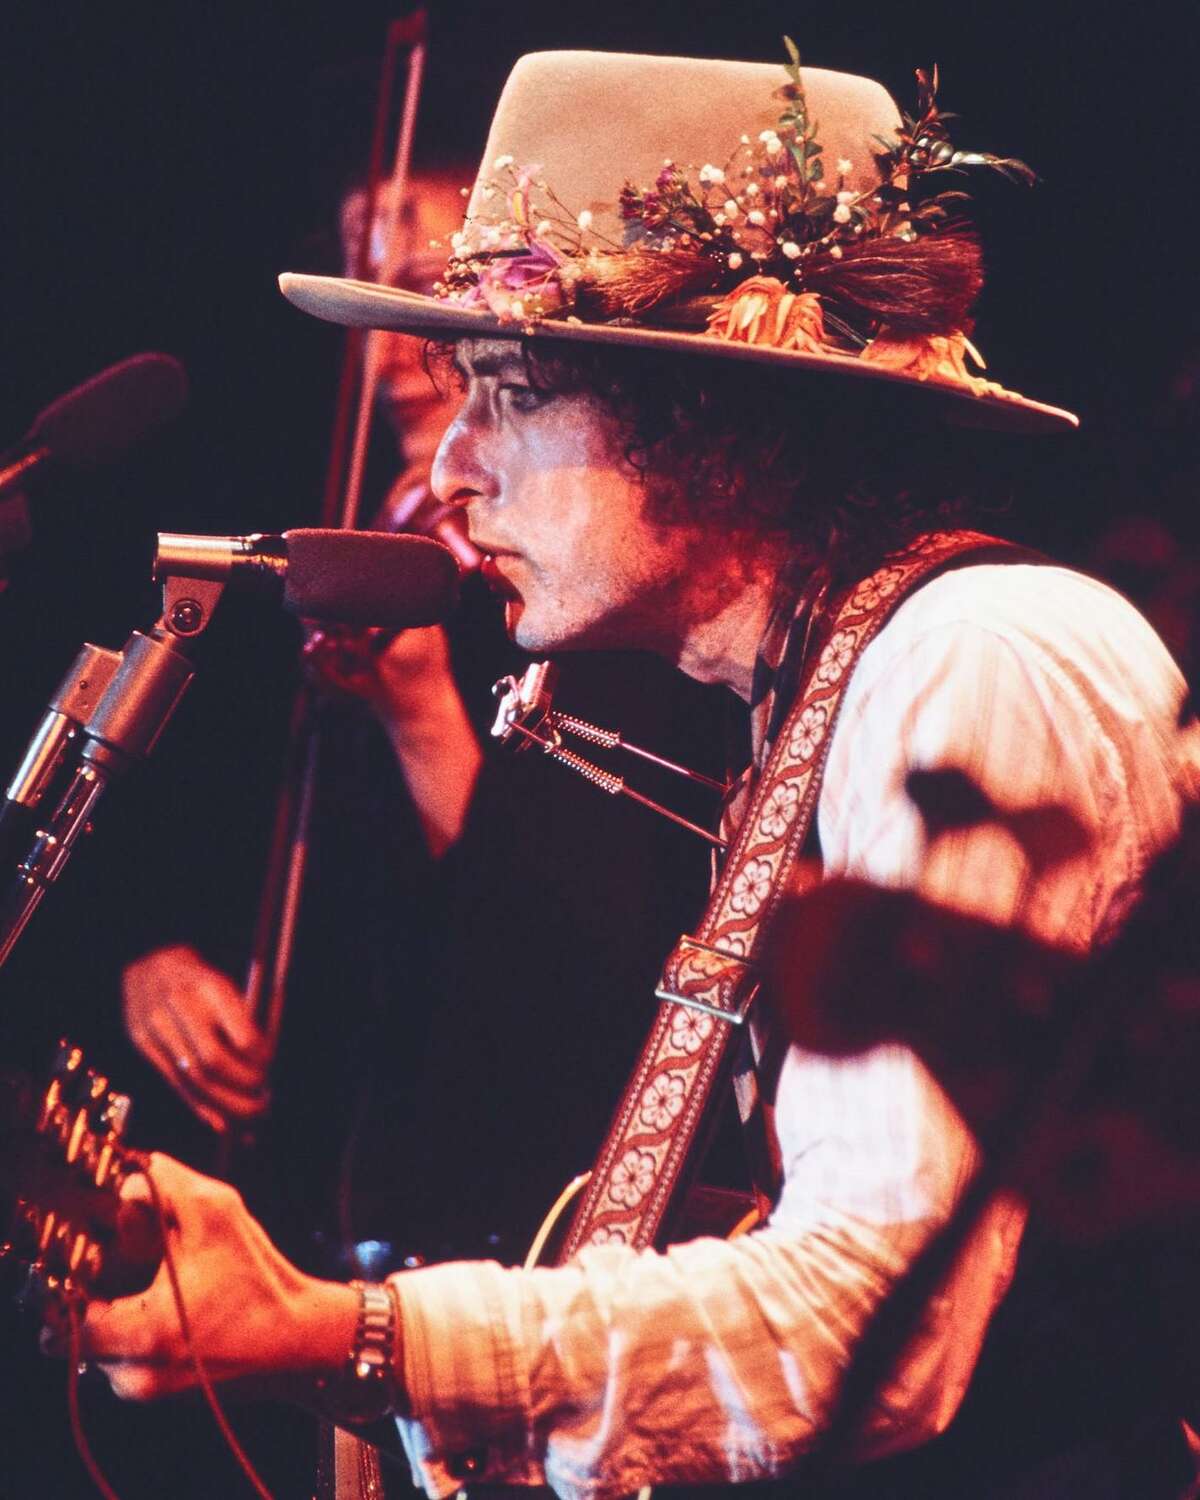 ‘Rolling Thunder Revue: A Bob Dylan Story by Martin Scorsese’ is described as “part documentary, part concert film, part fever dream” as it captures the troubled spirit of America in 1975 and the joyous music that Bob Dylan performed during the fall of that year.